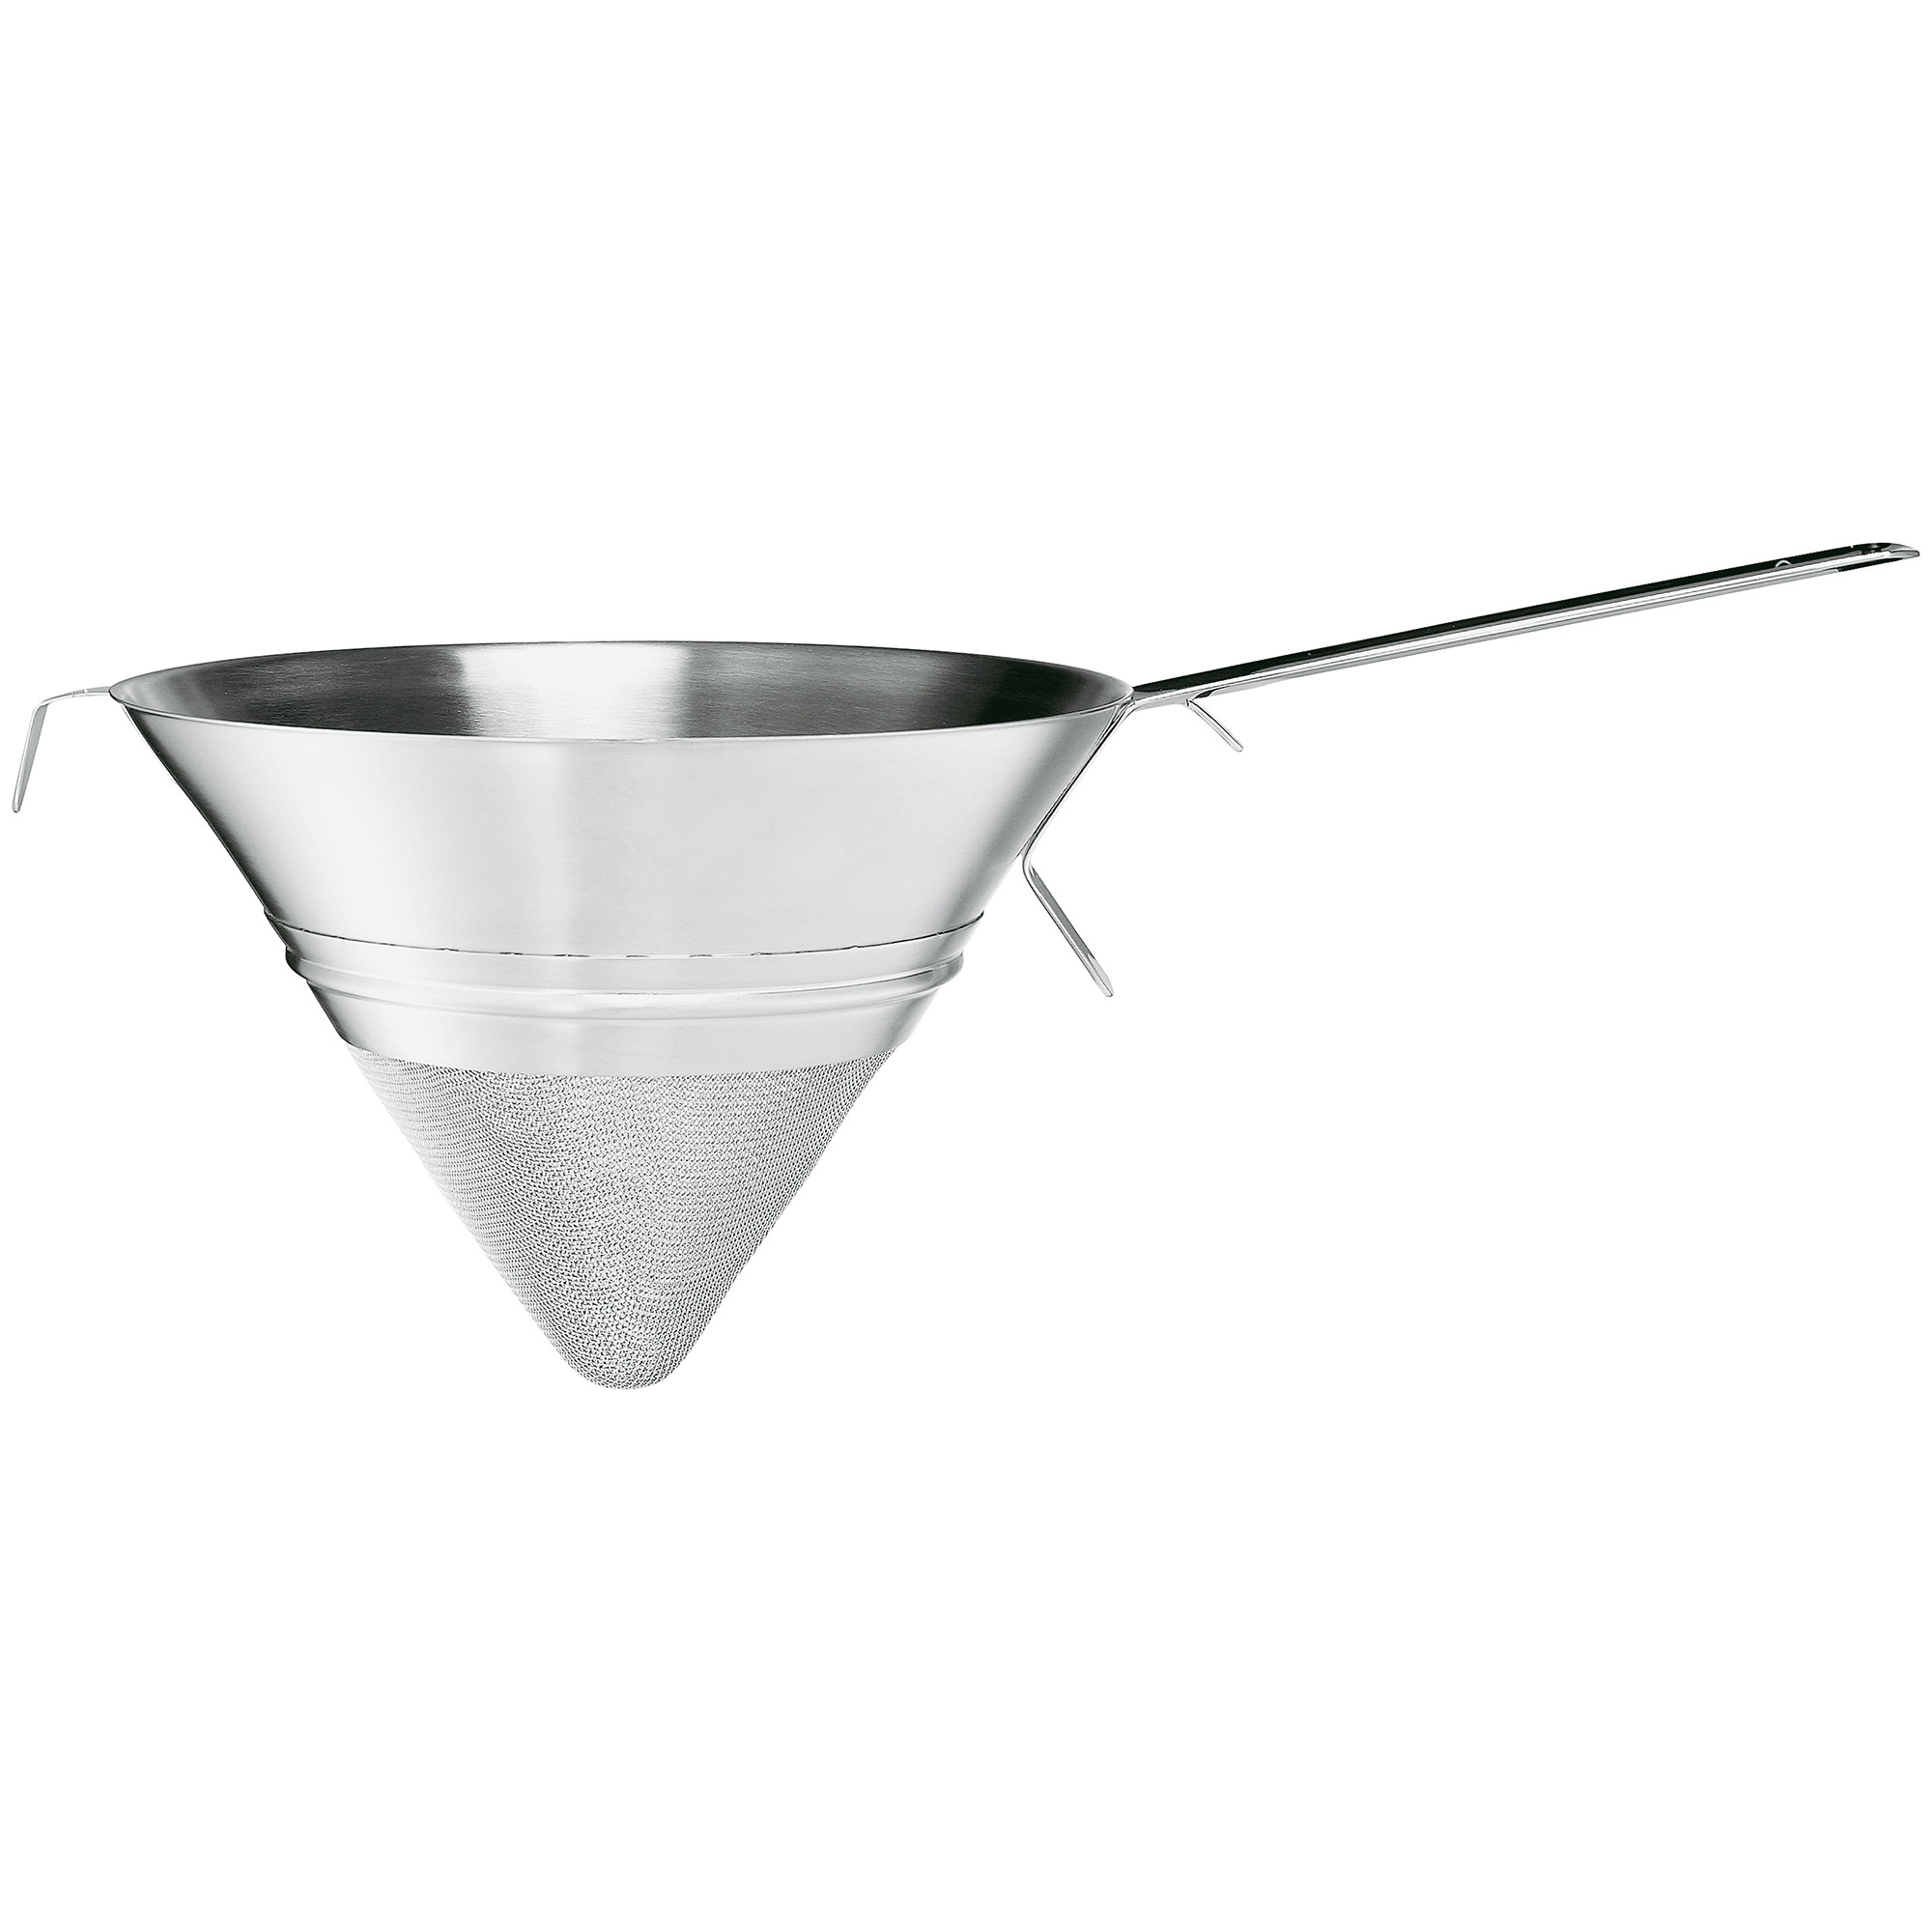 Hotel Chinois Strainer with gauze inset Ø 25 cm|9.8 in.